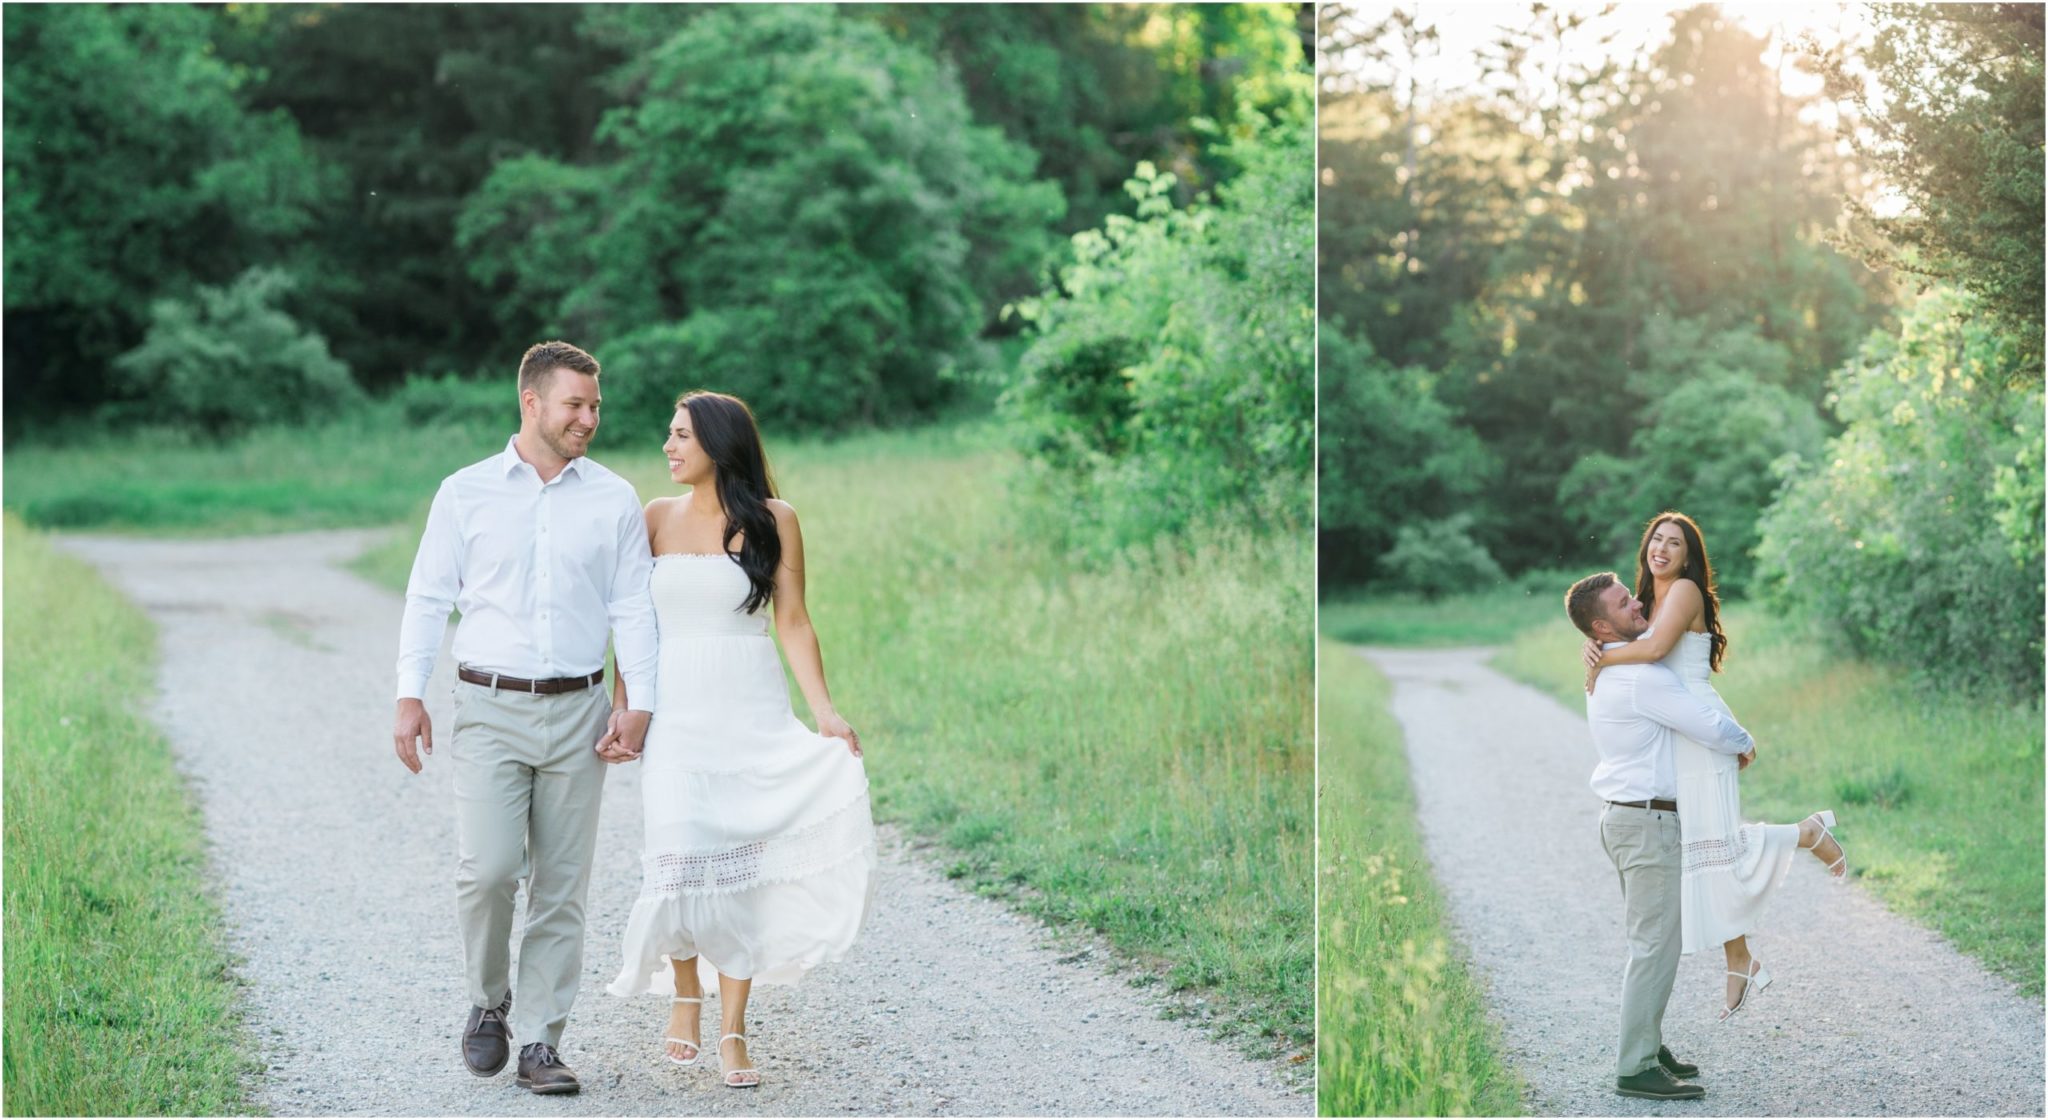 a collaged image of a couple walking while holding hands and another of the guy picking her up during their engagement photo session at stoney creek metro park